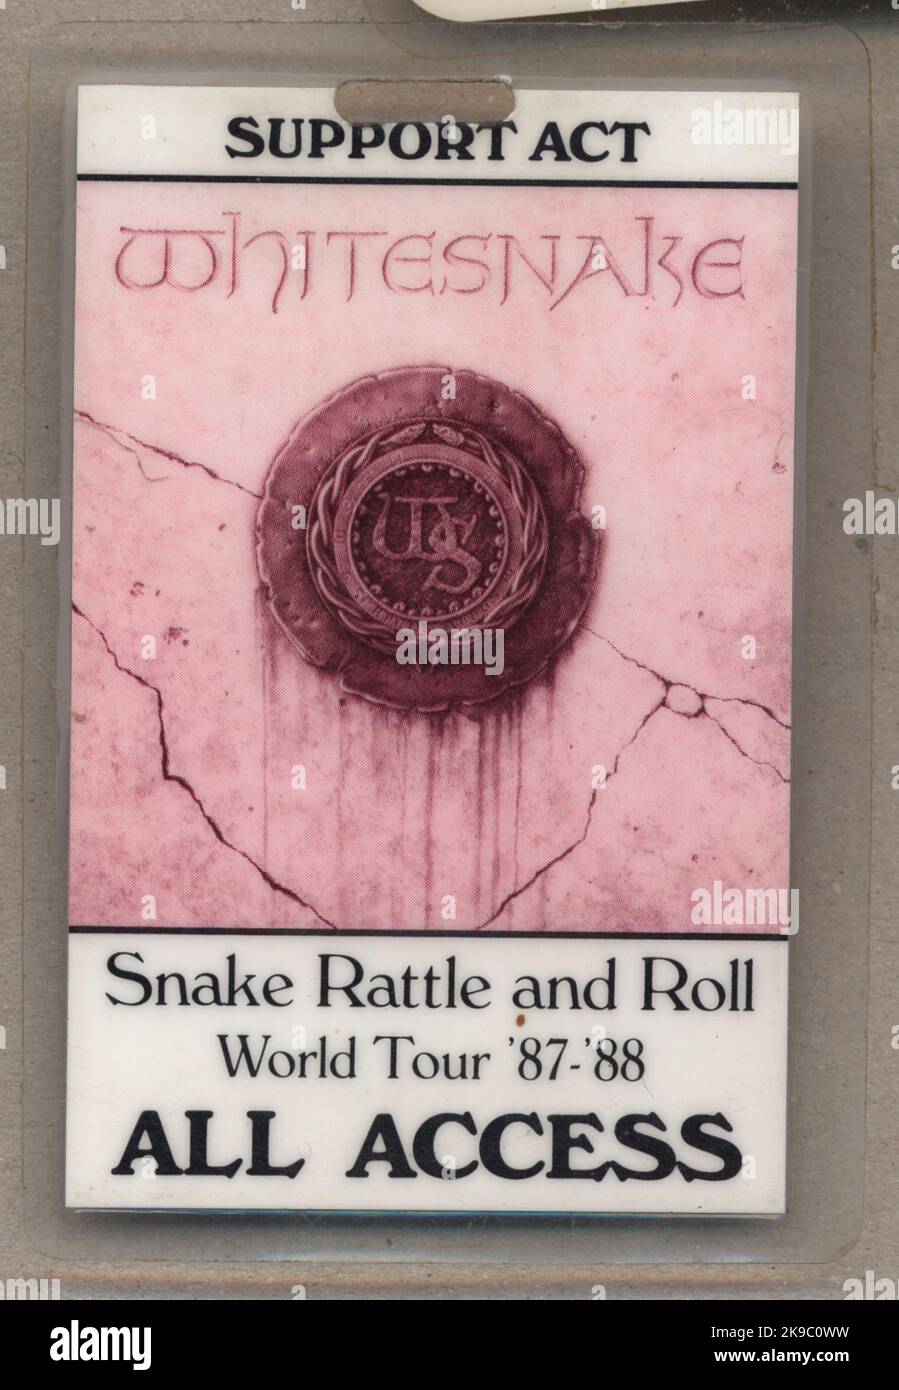 Rock concert tour laminate, as used by road crew and band members. Whitesnake American tour 1987 1988 Snake Rattle and Roll. Stock Photo